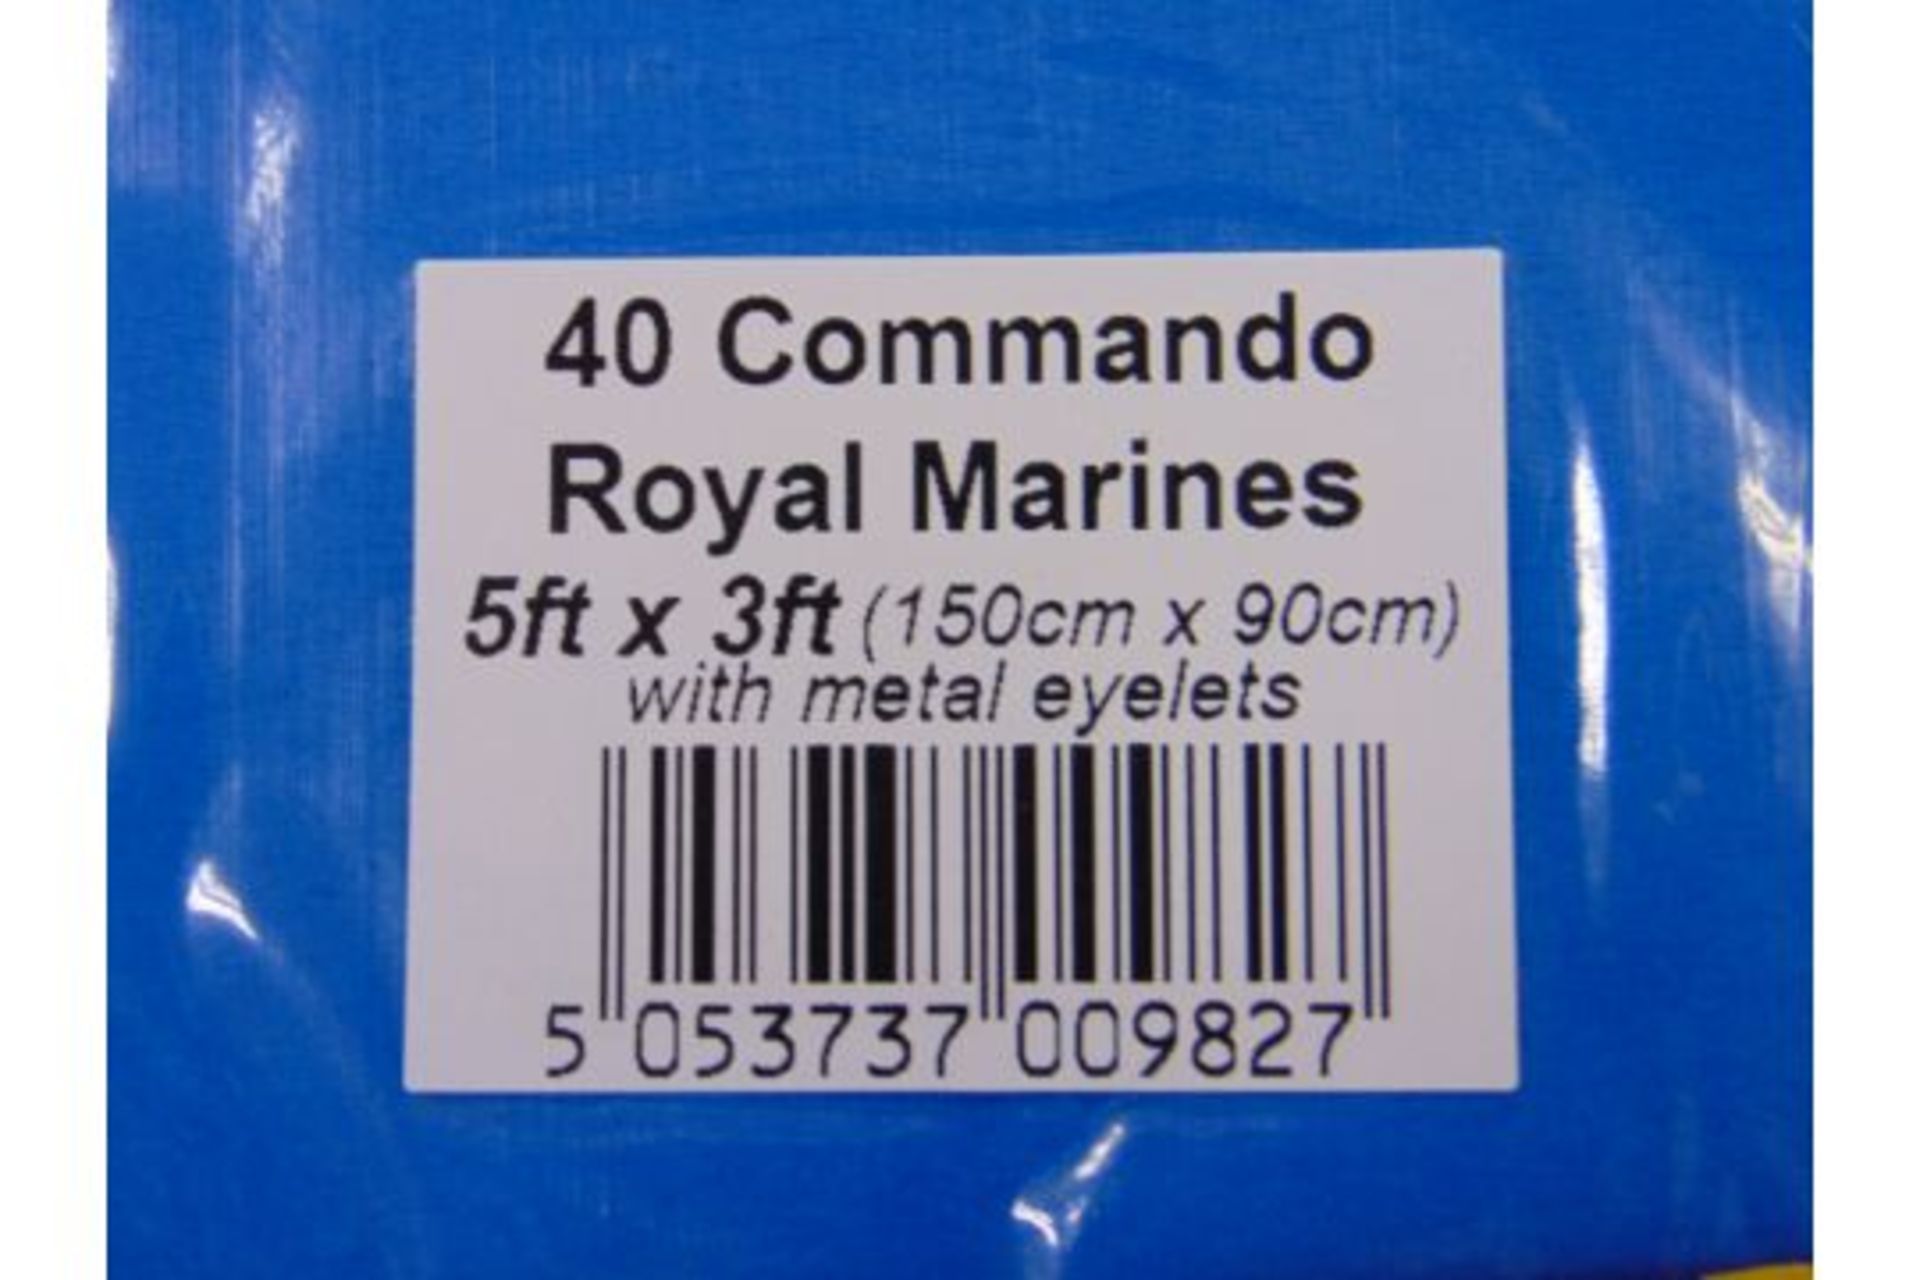 40 Commando Royal Marines Flag - 5ft x 3ft with Metal Eyelets. - Image 4 of 4